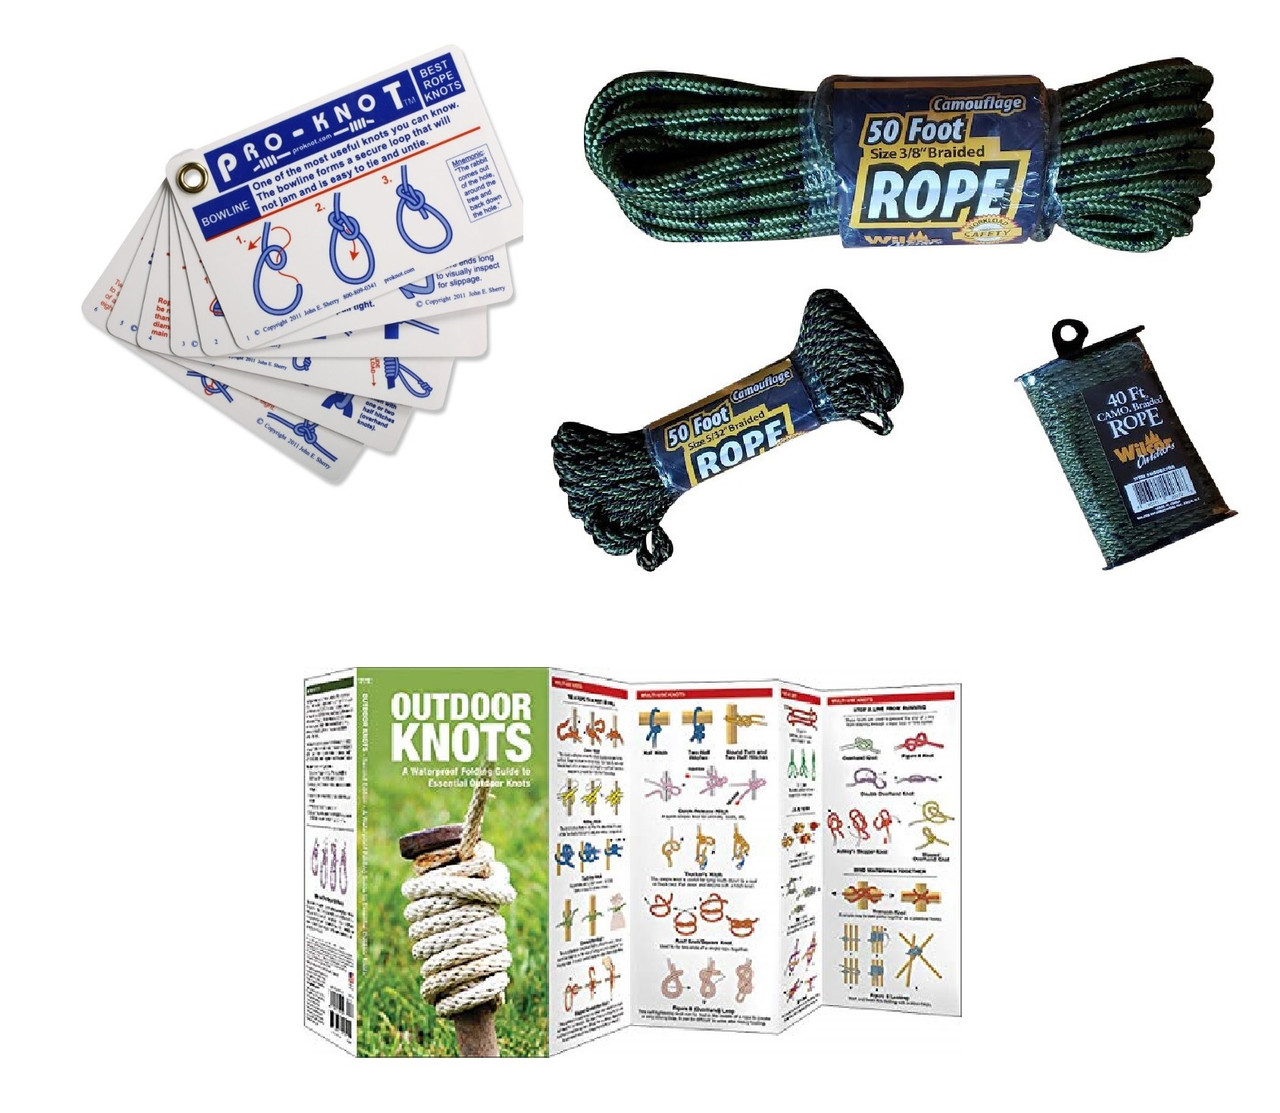 https://cdn10.bigcommerce.com/s-nkehw/products/680/images/1173/Knot_Tying_Kit_Deluxe_main_image__24522.1581183074.1280.1280.jpg?c=2